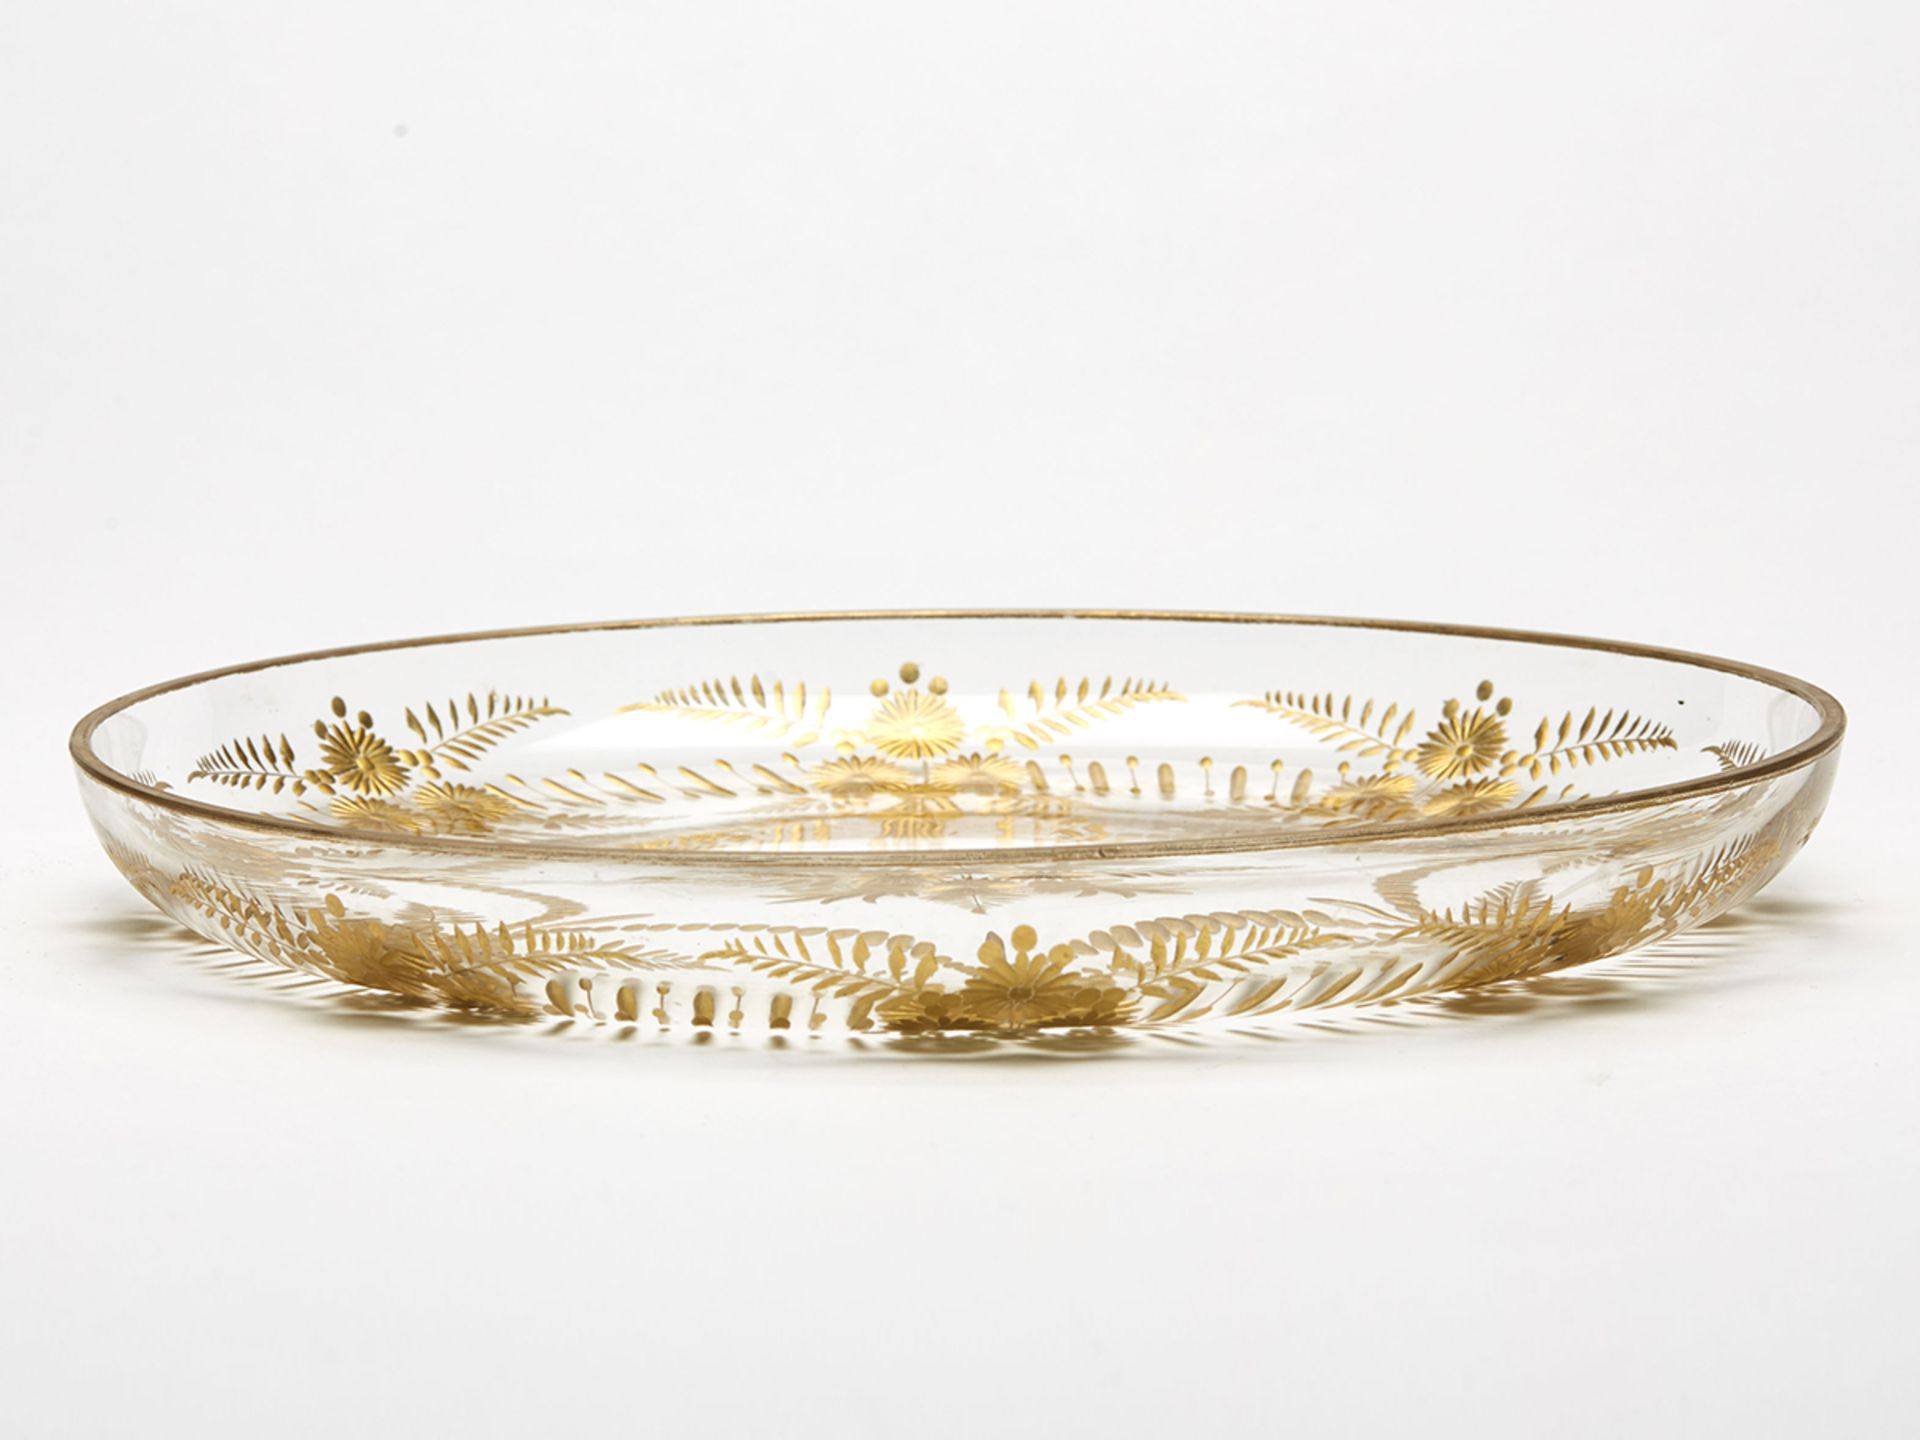 Stunning Antique Engraved And Gilded Glass Tray 19Th C. - Image 5 of 5